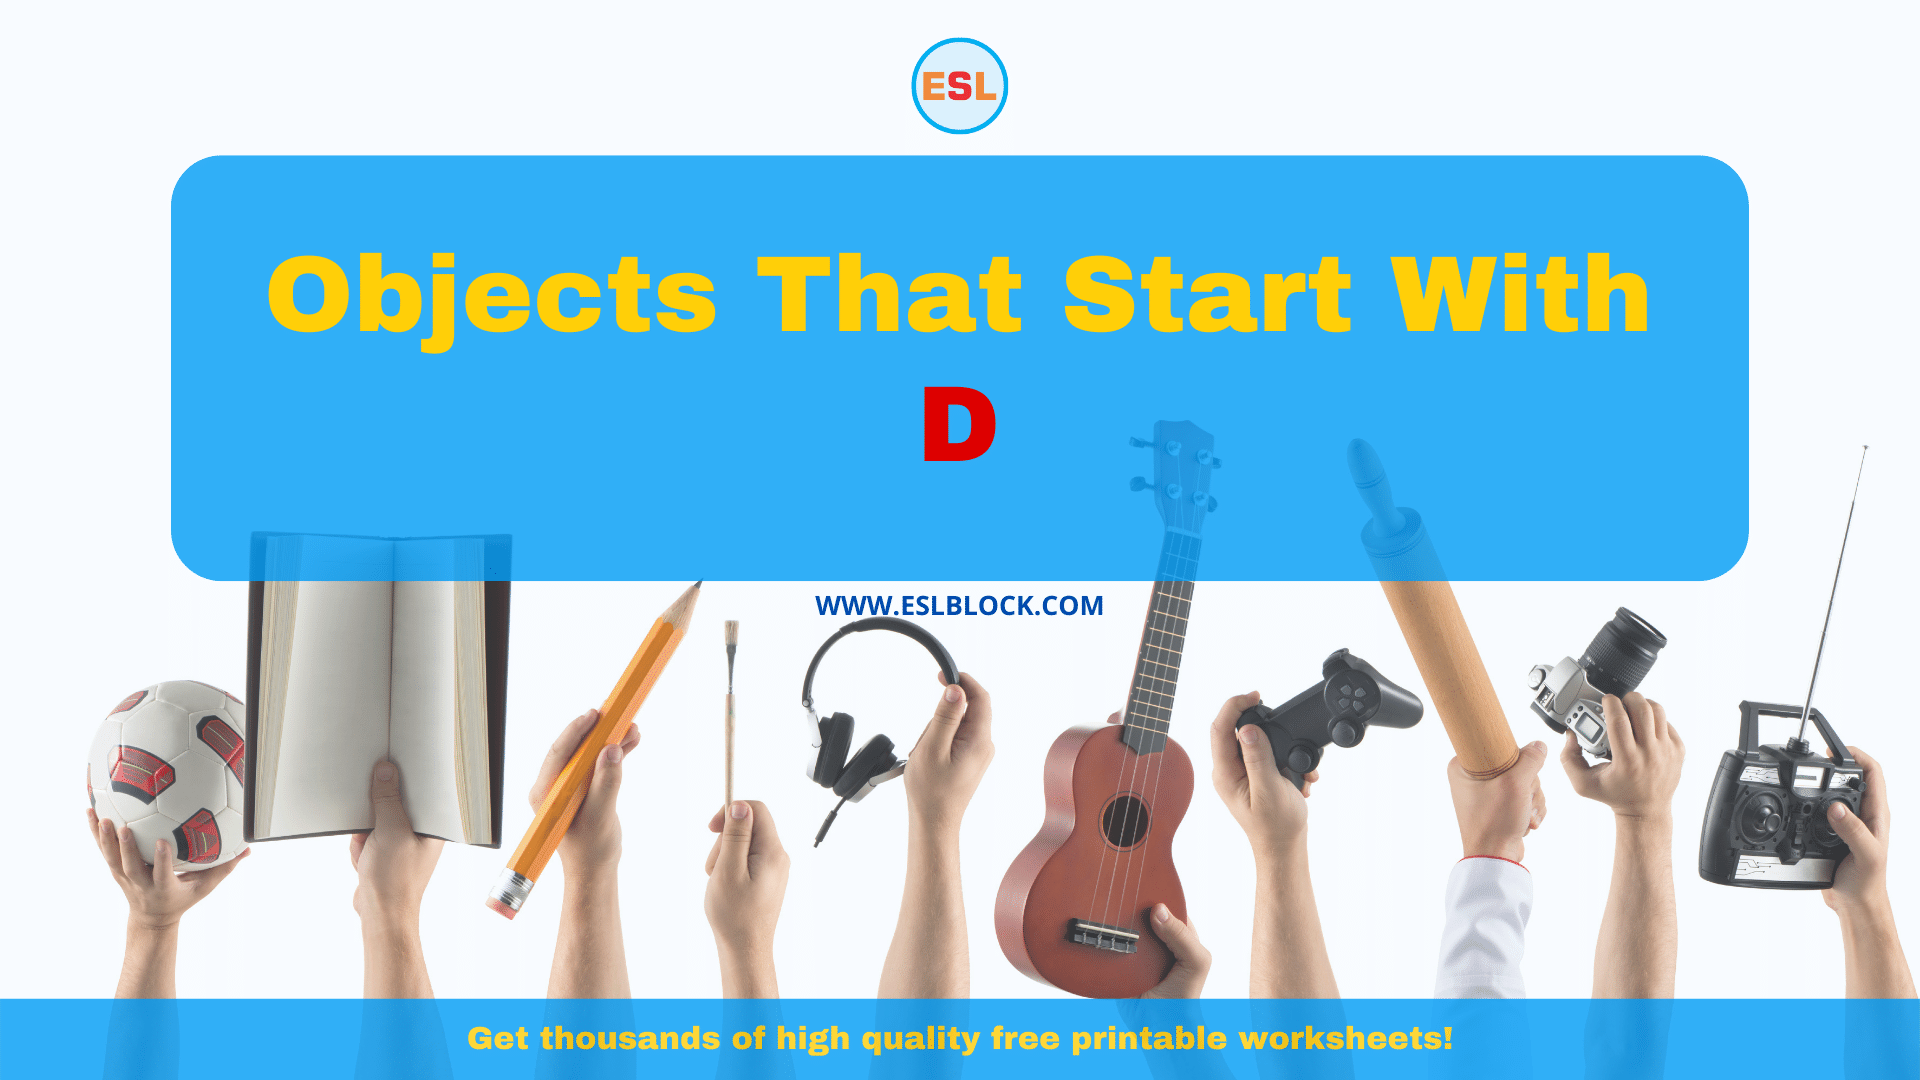 5 Letter Objects Starting With D, D Objects, D Objects in English, D Objects Names, English, English Nouns, English Vocabulary, English Words, List of Objects That Start With D, Nouns, Objects List, Objects That Start With D, Things Names, Vocabulary